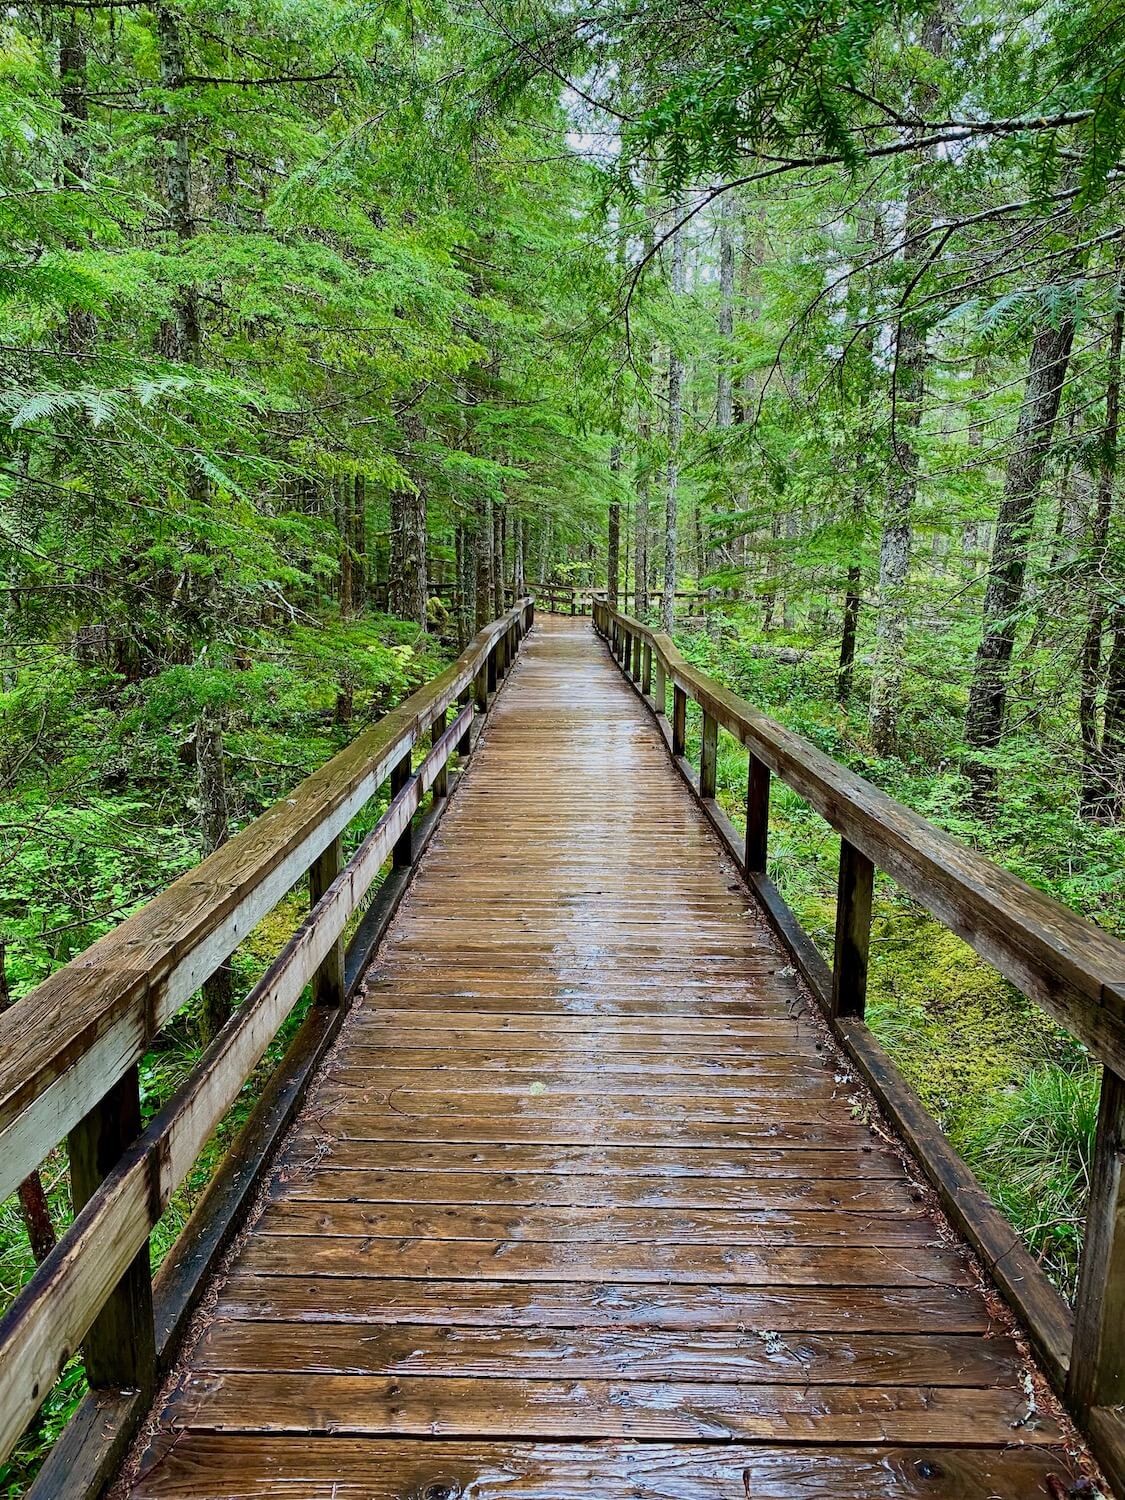 The trail of two forests is a must for a visit to Mount St. Helens.  Here, the wood boardwalk hovers above a lava covered forest with new moss and other vegetation growing on top amongst fir trees in the forest.  The wood is shiny from recent rain water.  